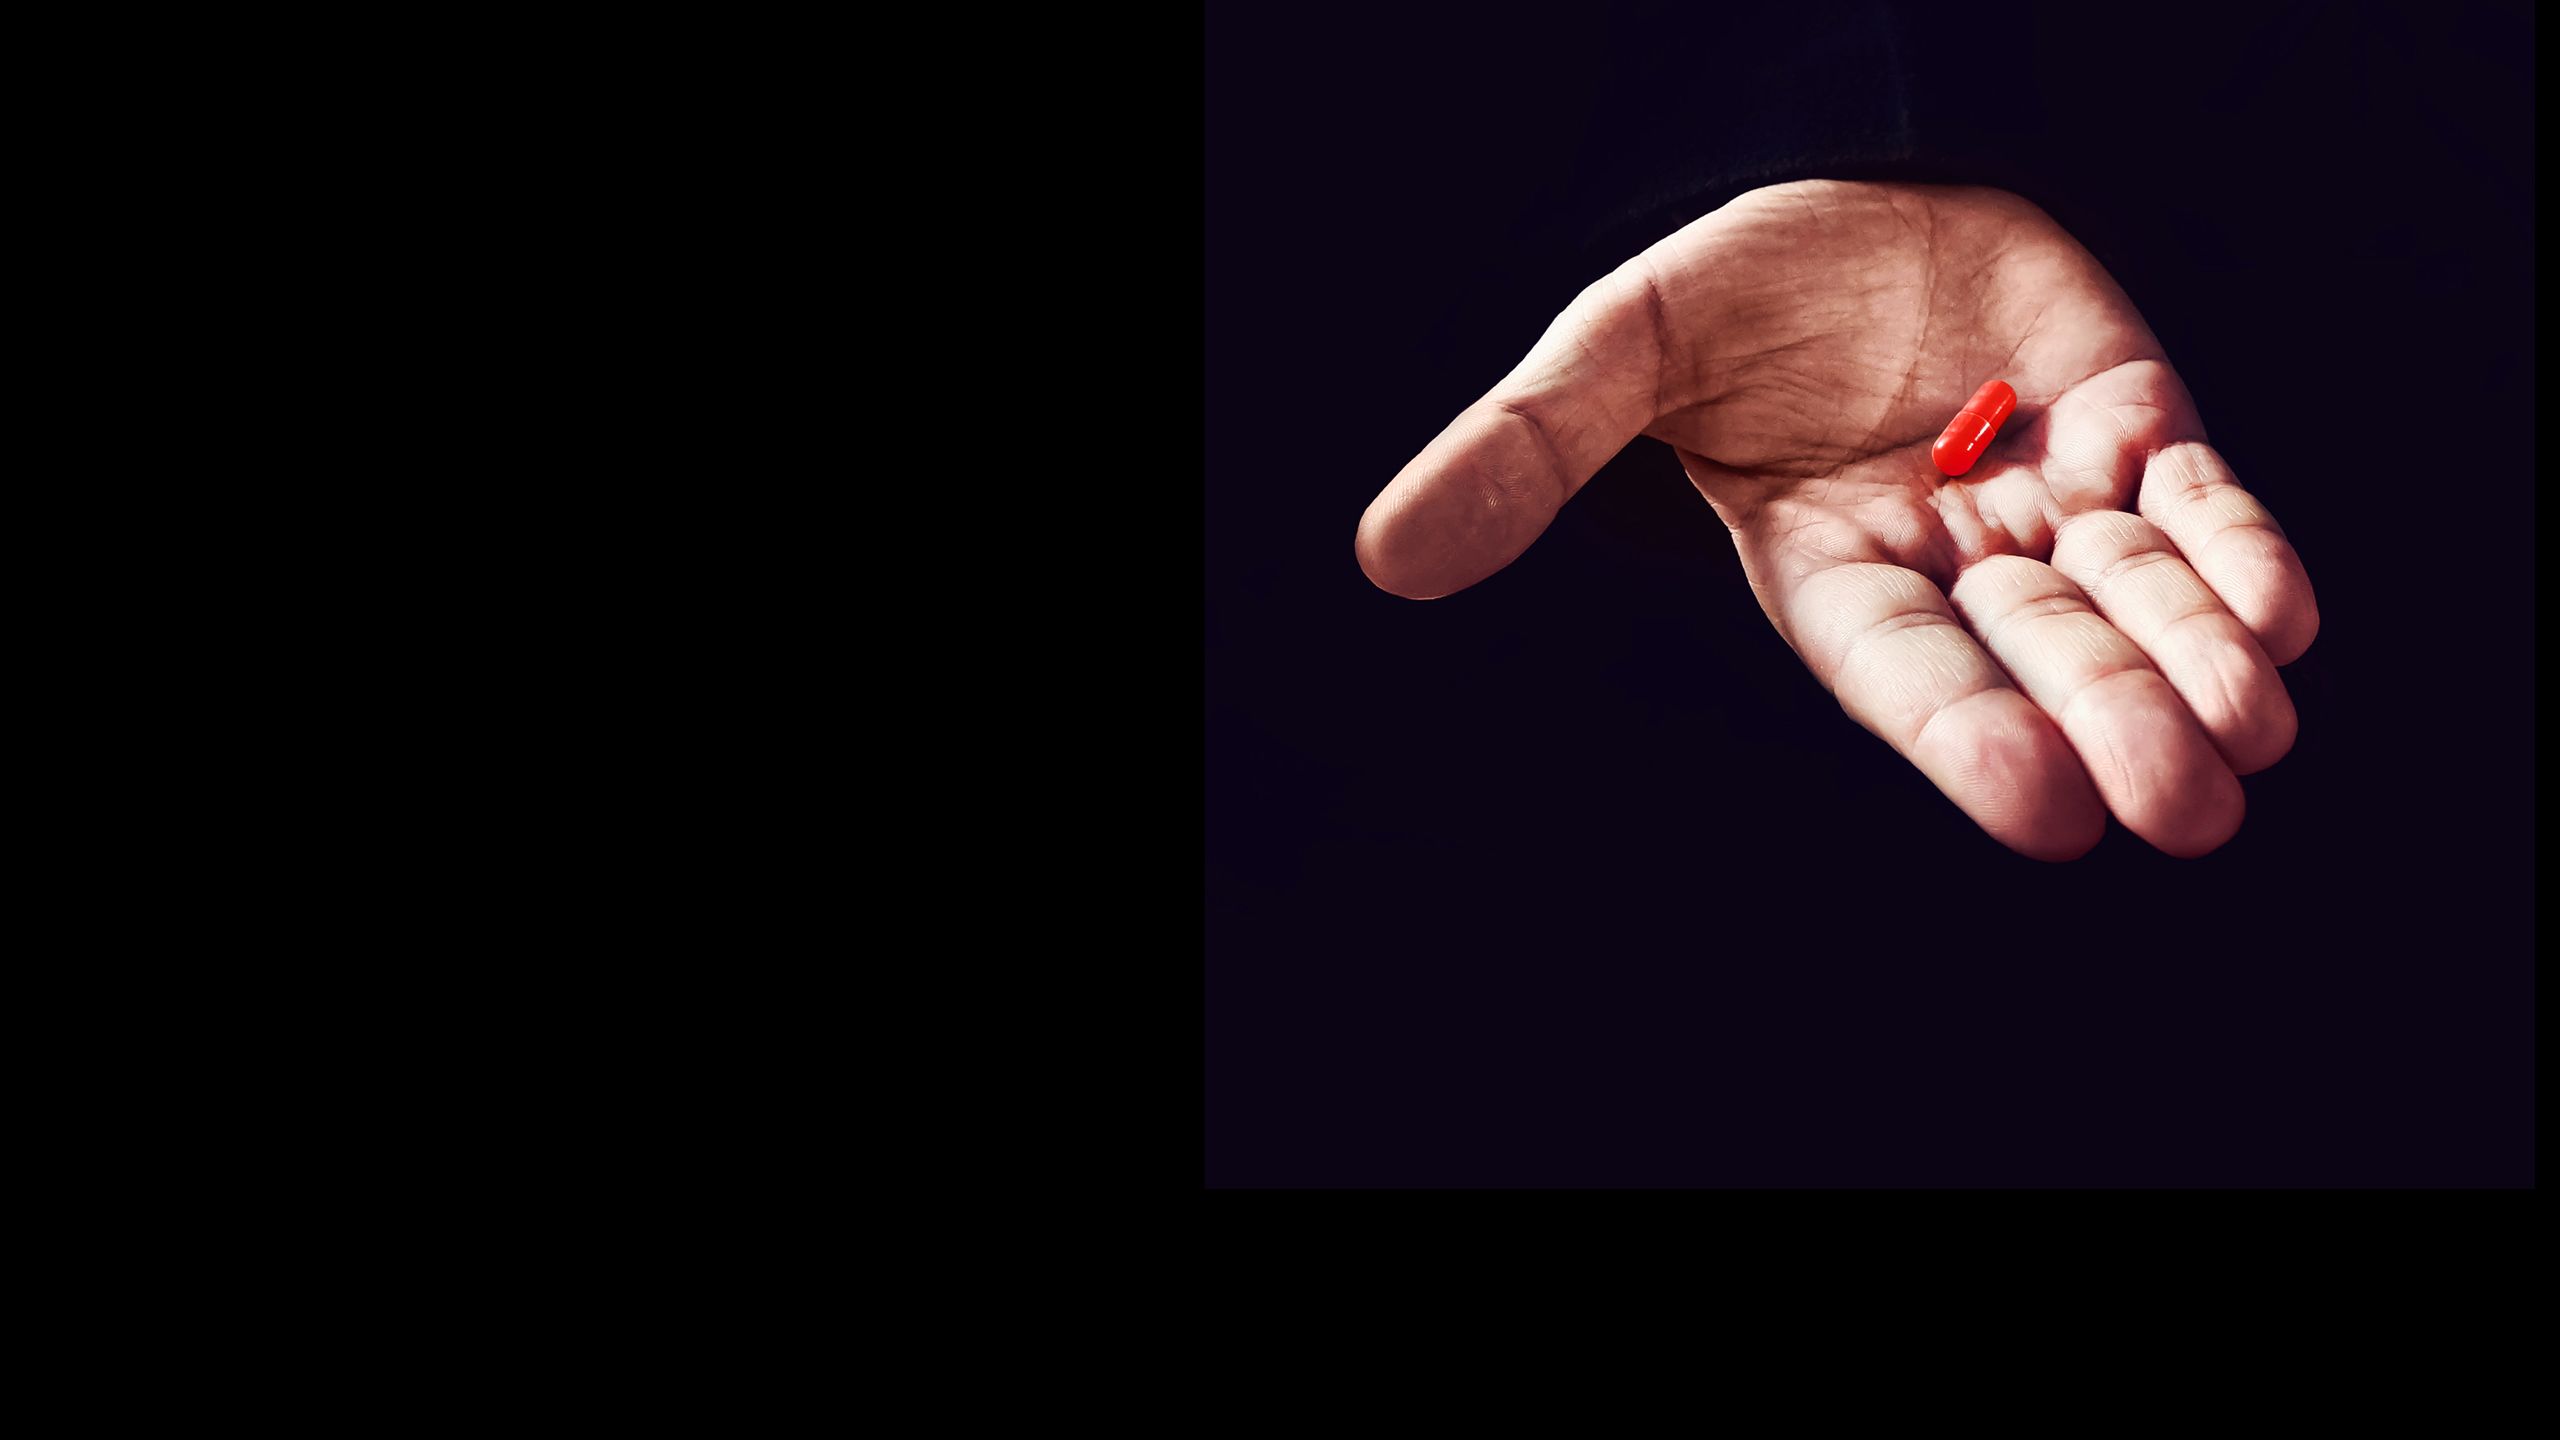 Hand holding a red pill